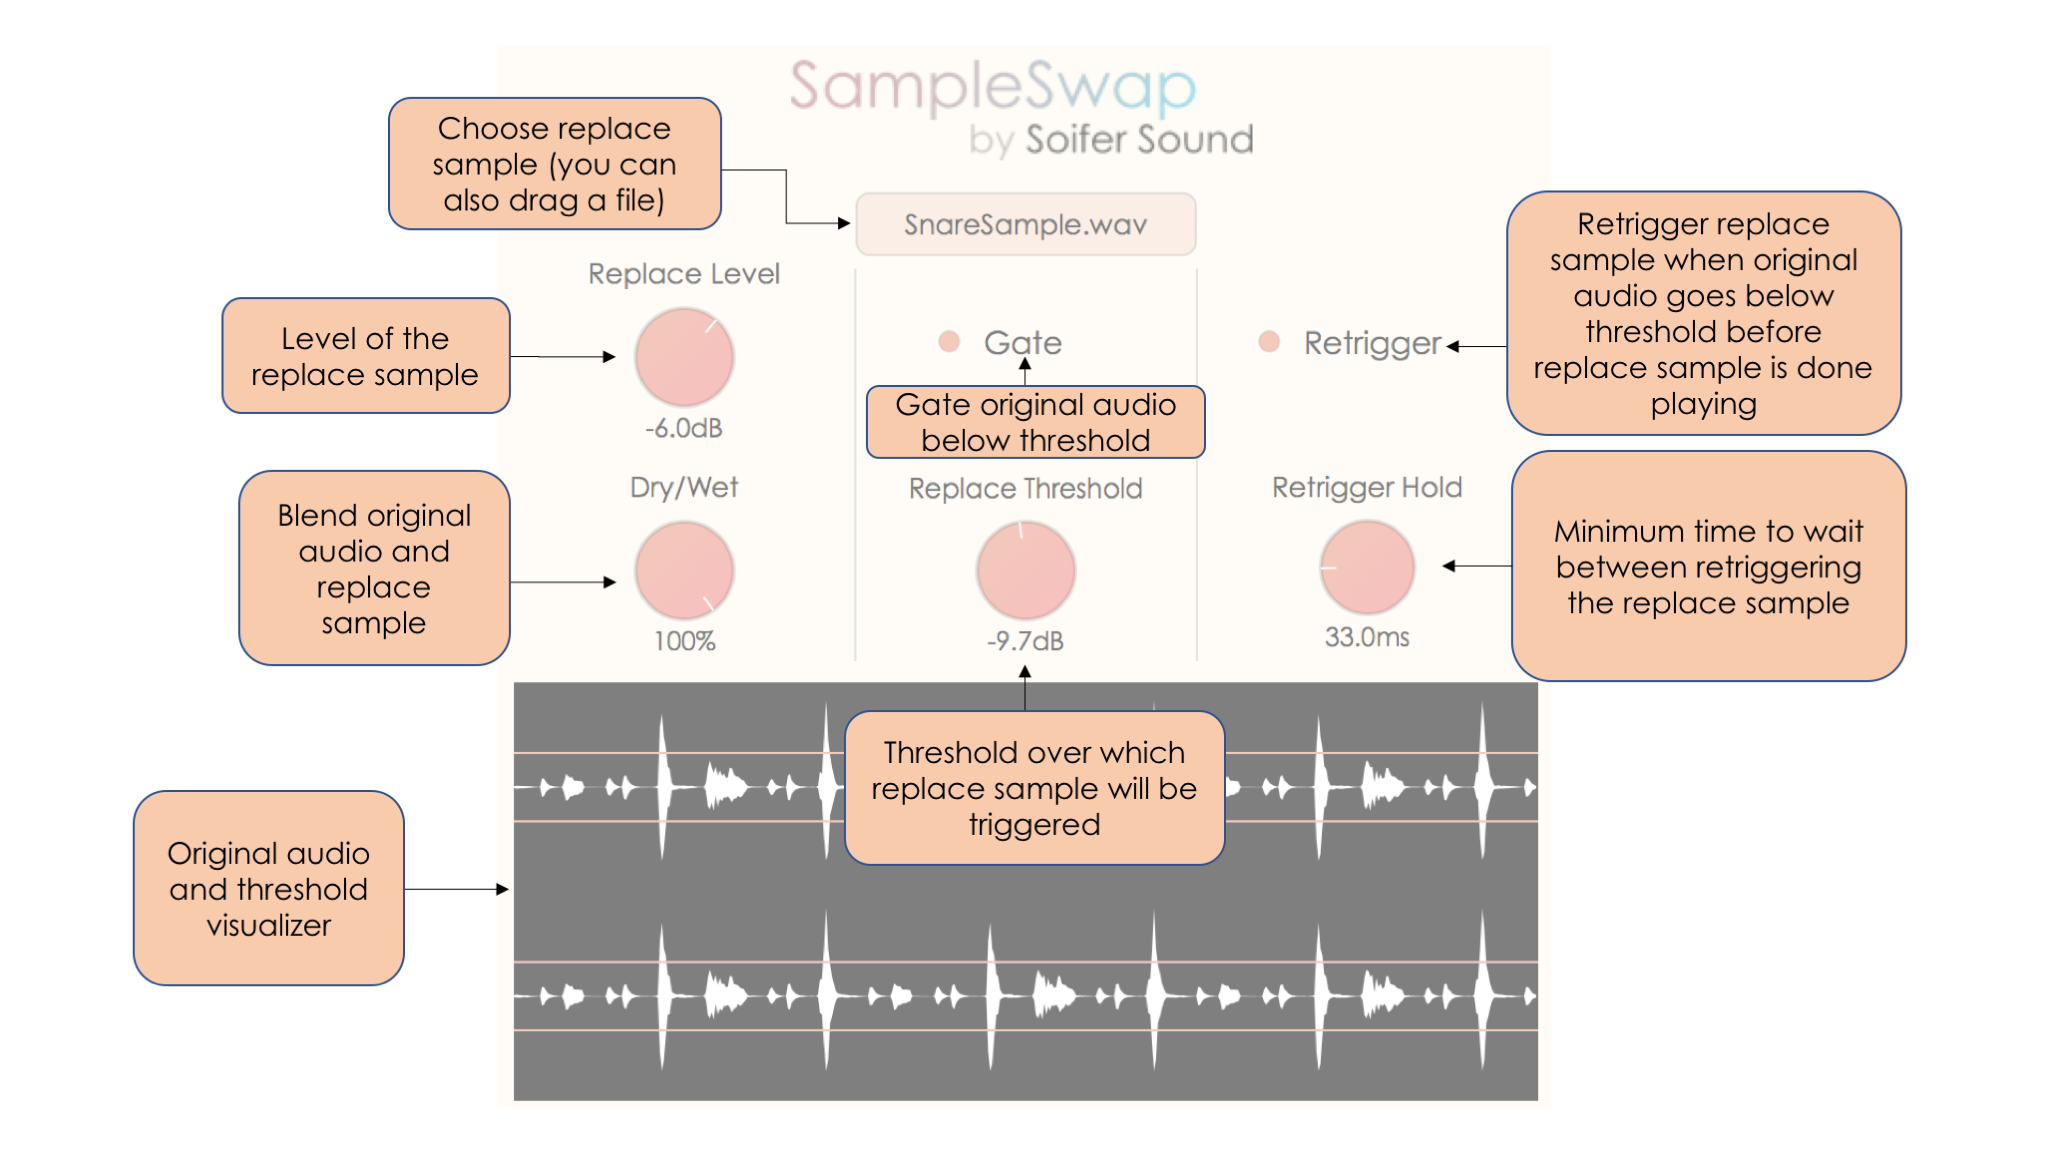 The instruction for the SampleSwap plugin